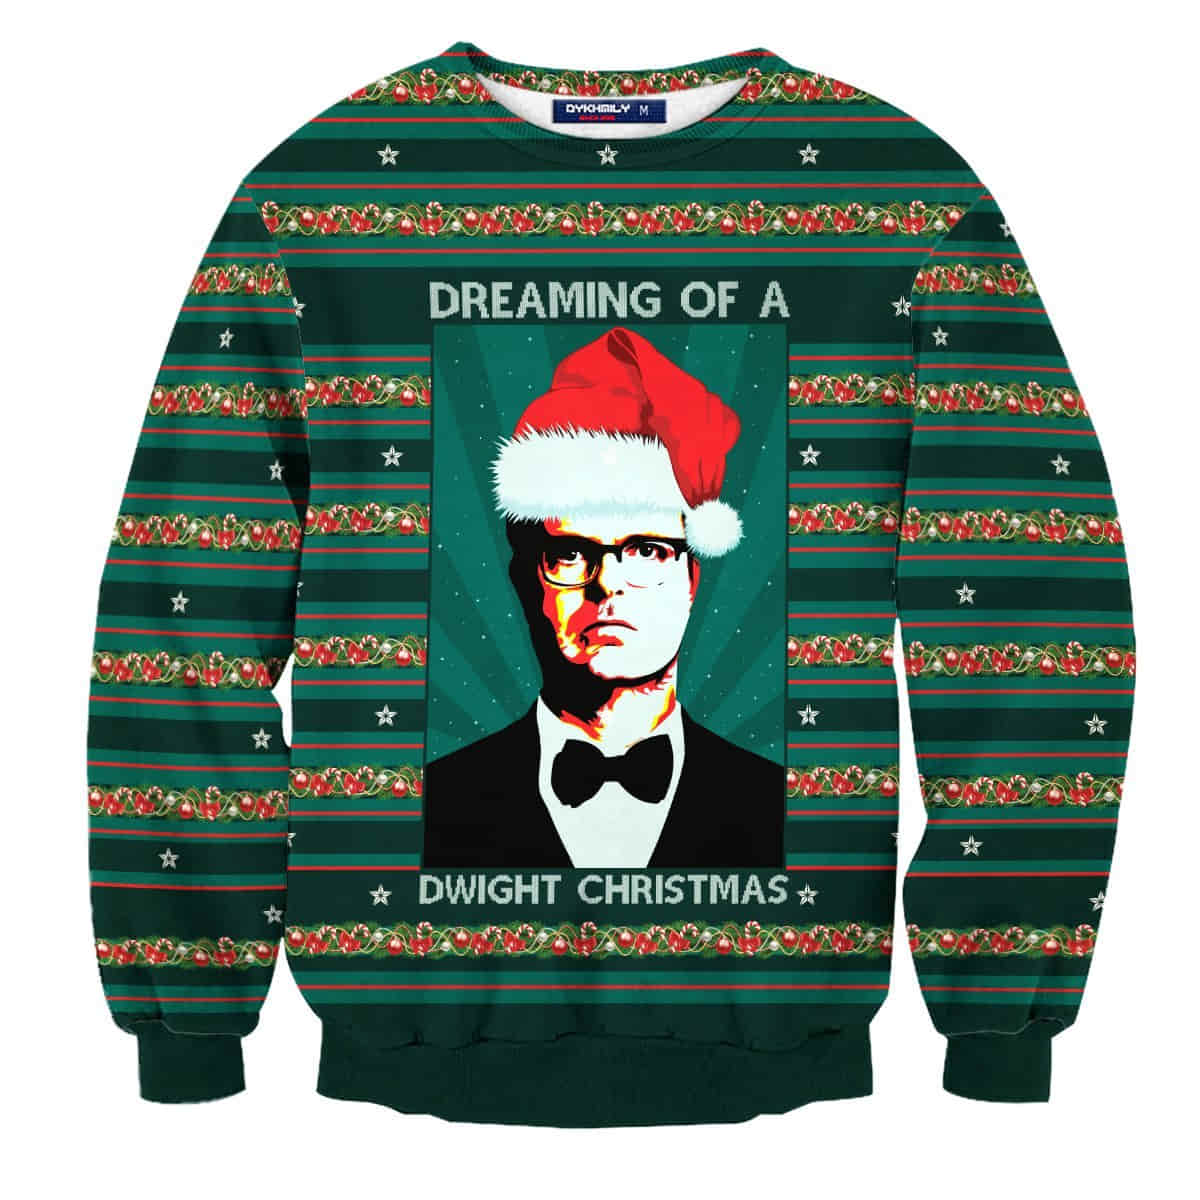 Dreaming Of Dwight Christmas Wool Knitted Sweater